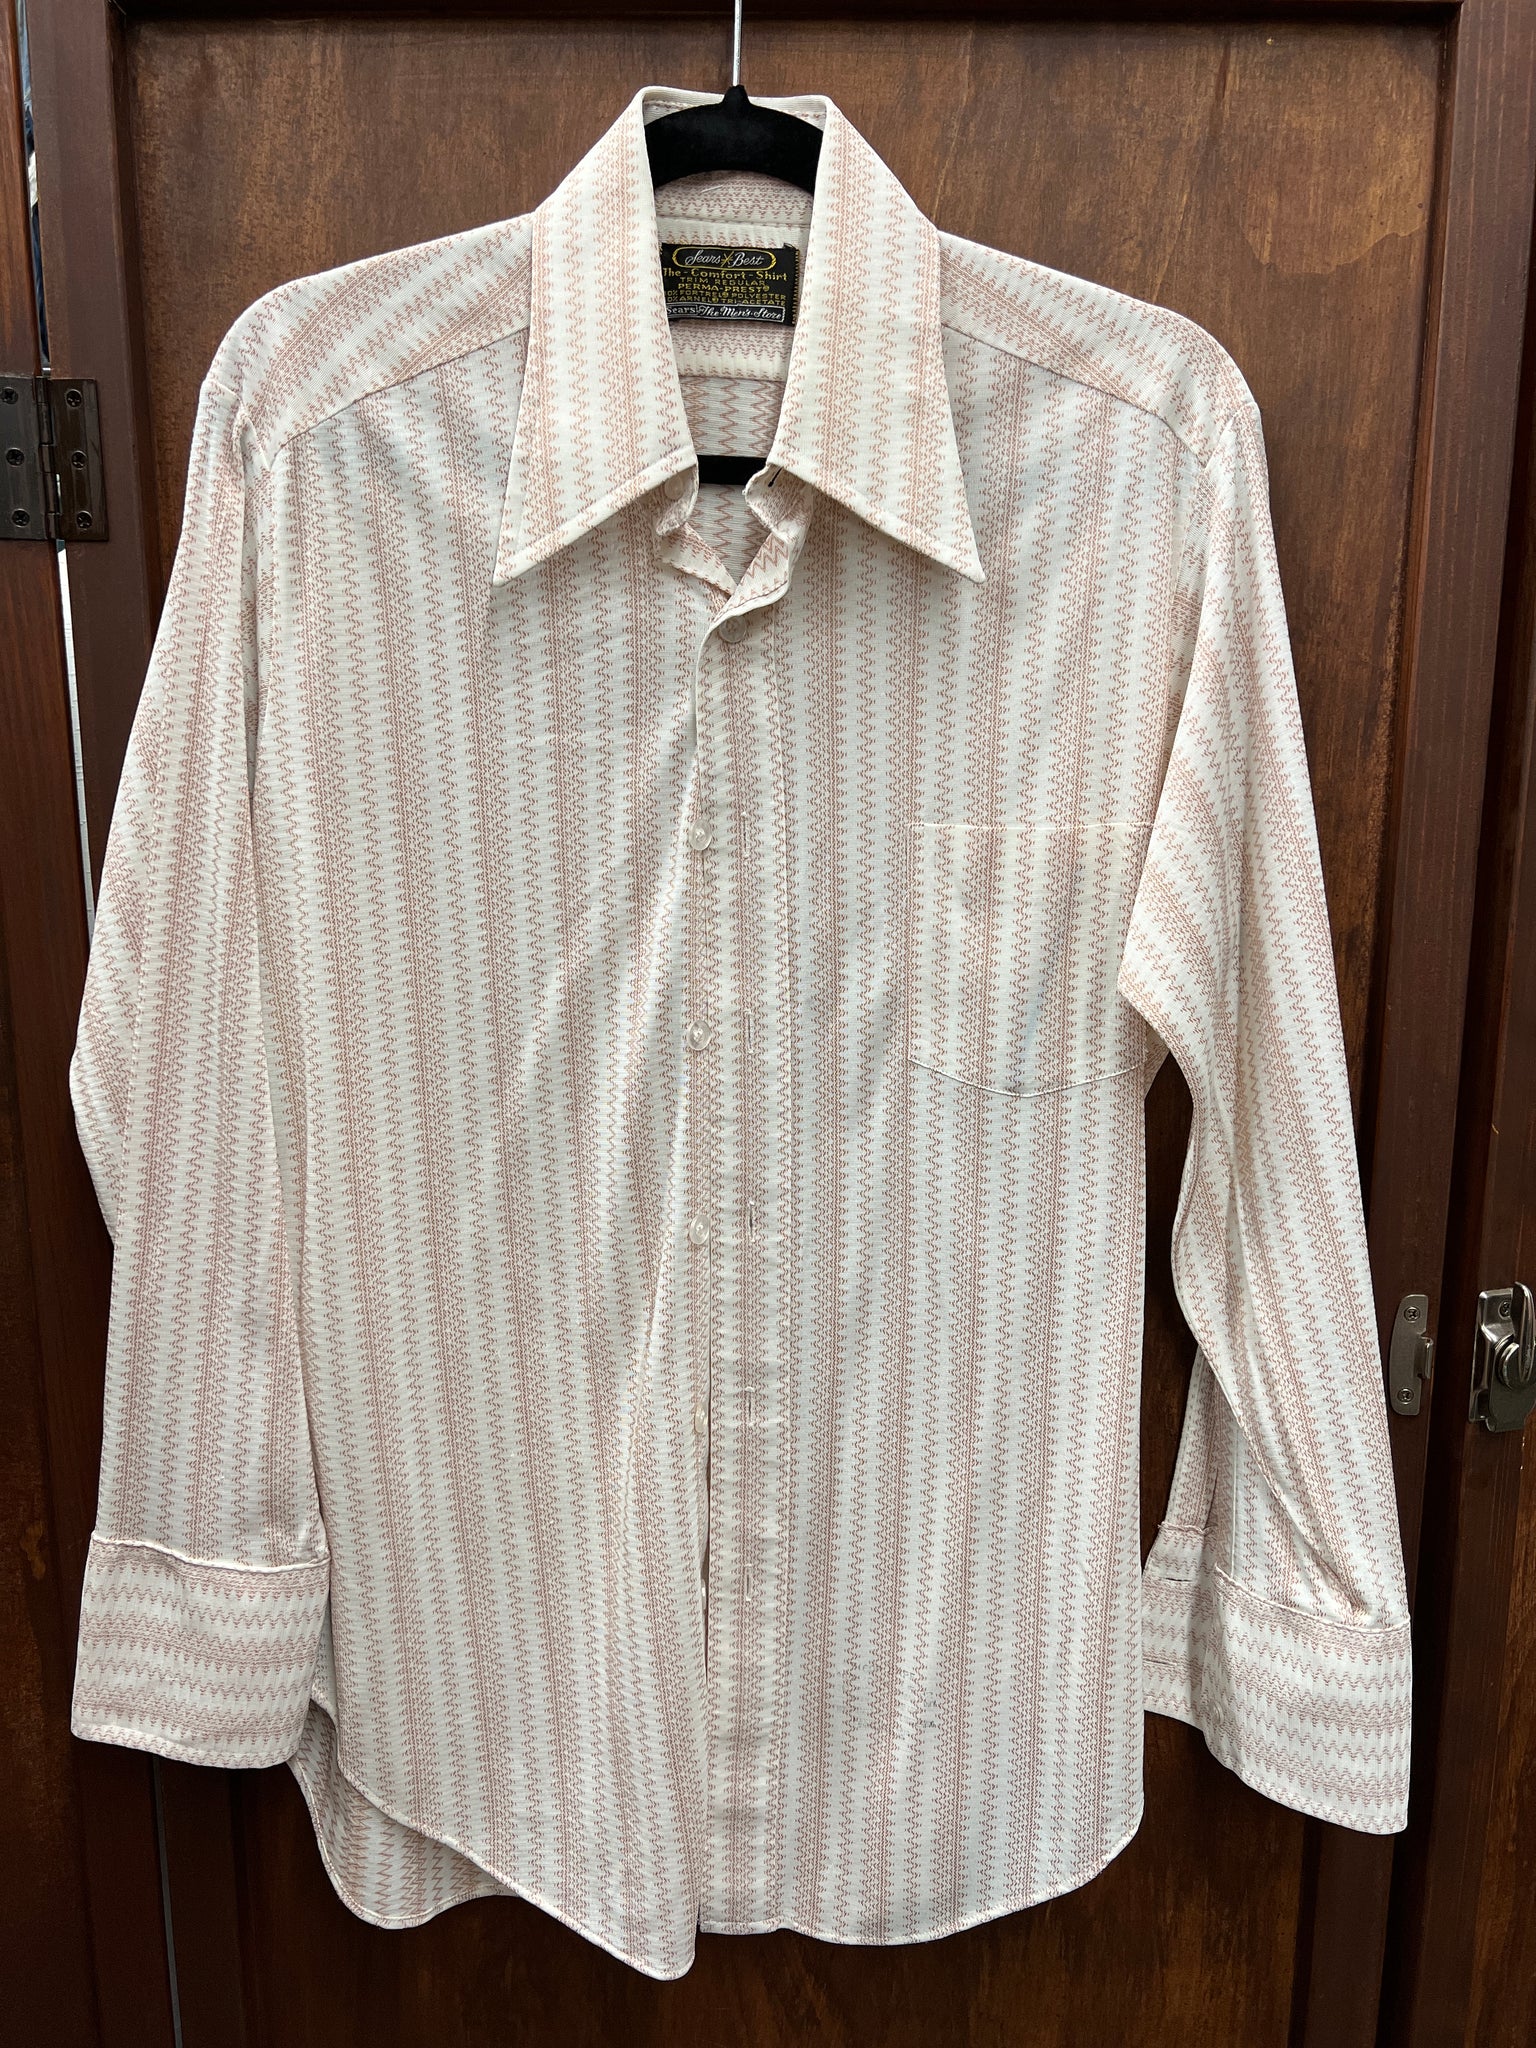 1970s MENS TOP- Sears Best soft poly cream w/ brown zigzag l/s